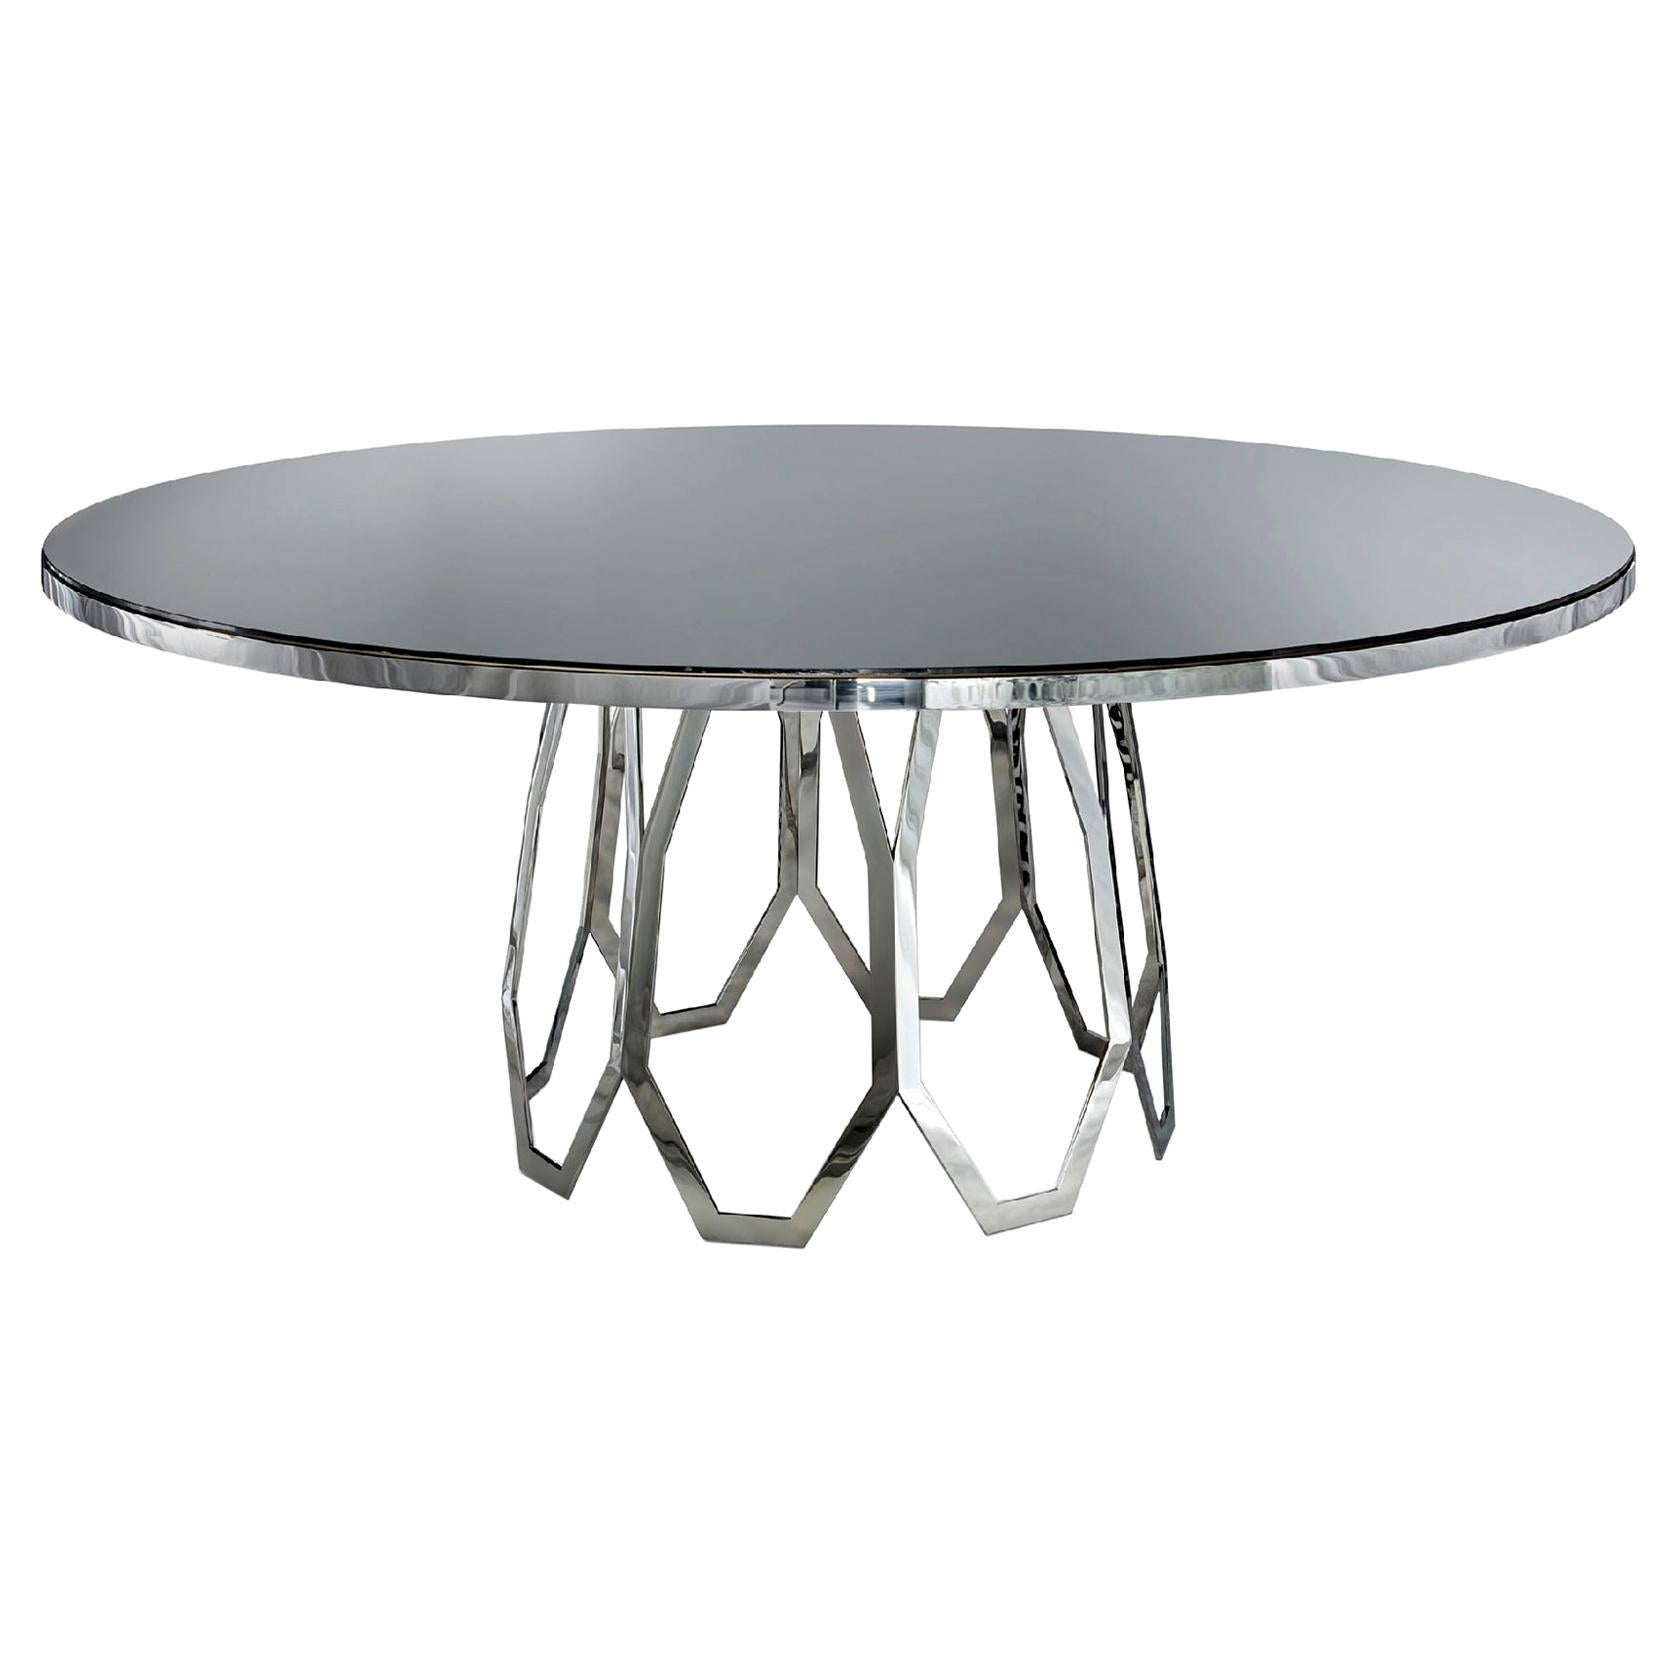 Table Frame Polished Stainless Steel Top Available Mirror Marble & Liquid Metal